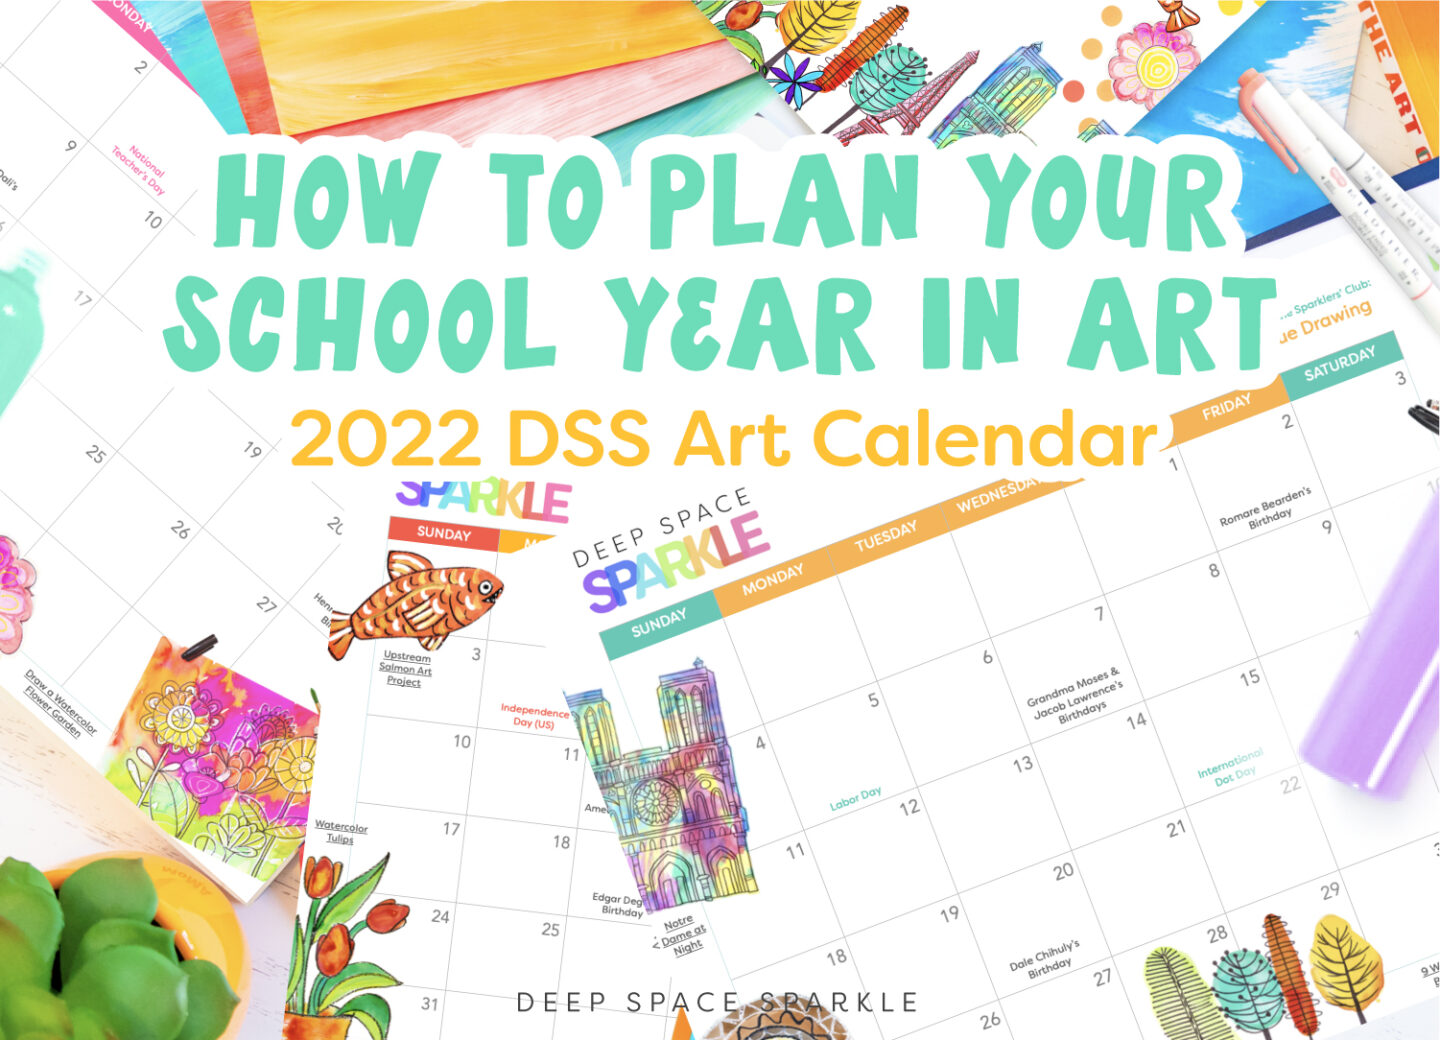 How to Plan Your School Year in Art | Resource for art teachers with downloadable printout calendar for the art teacher